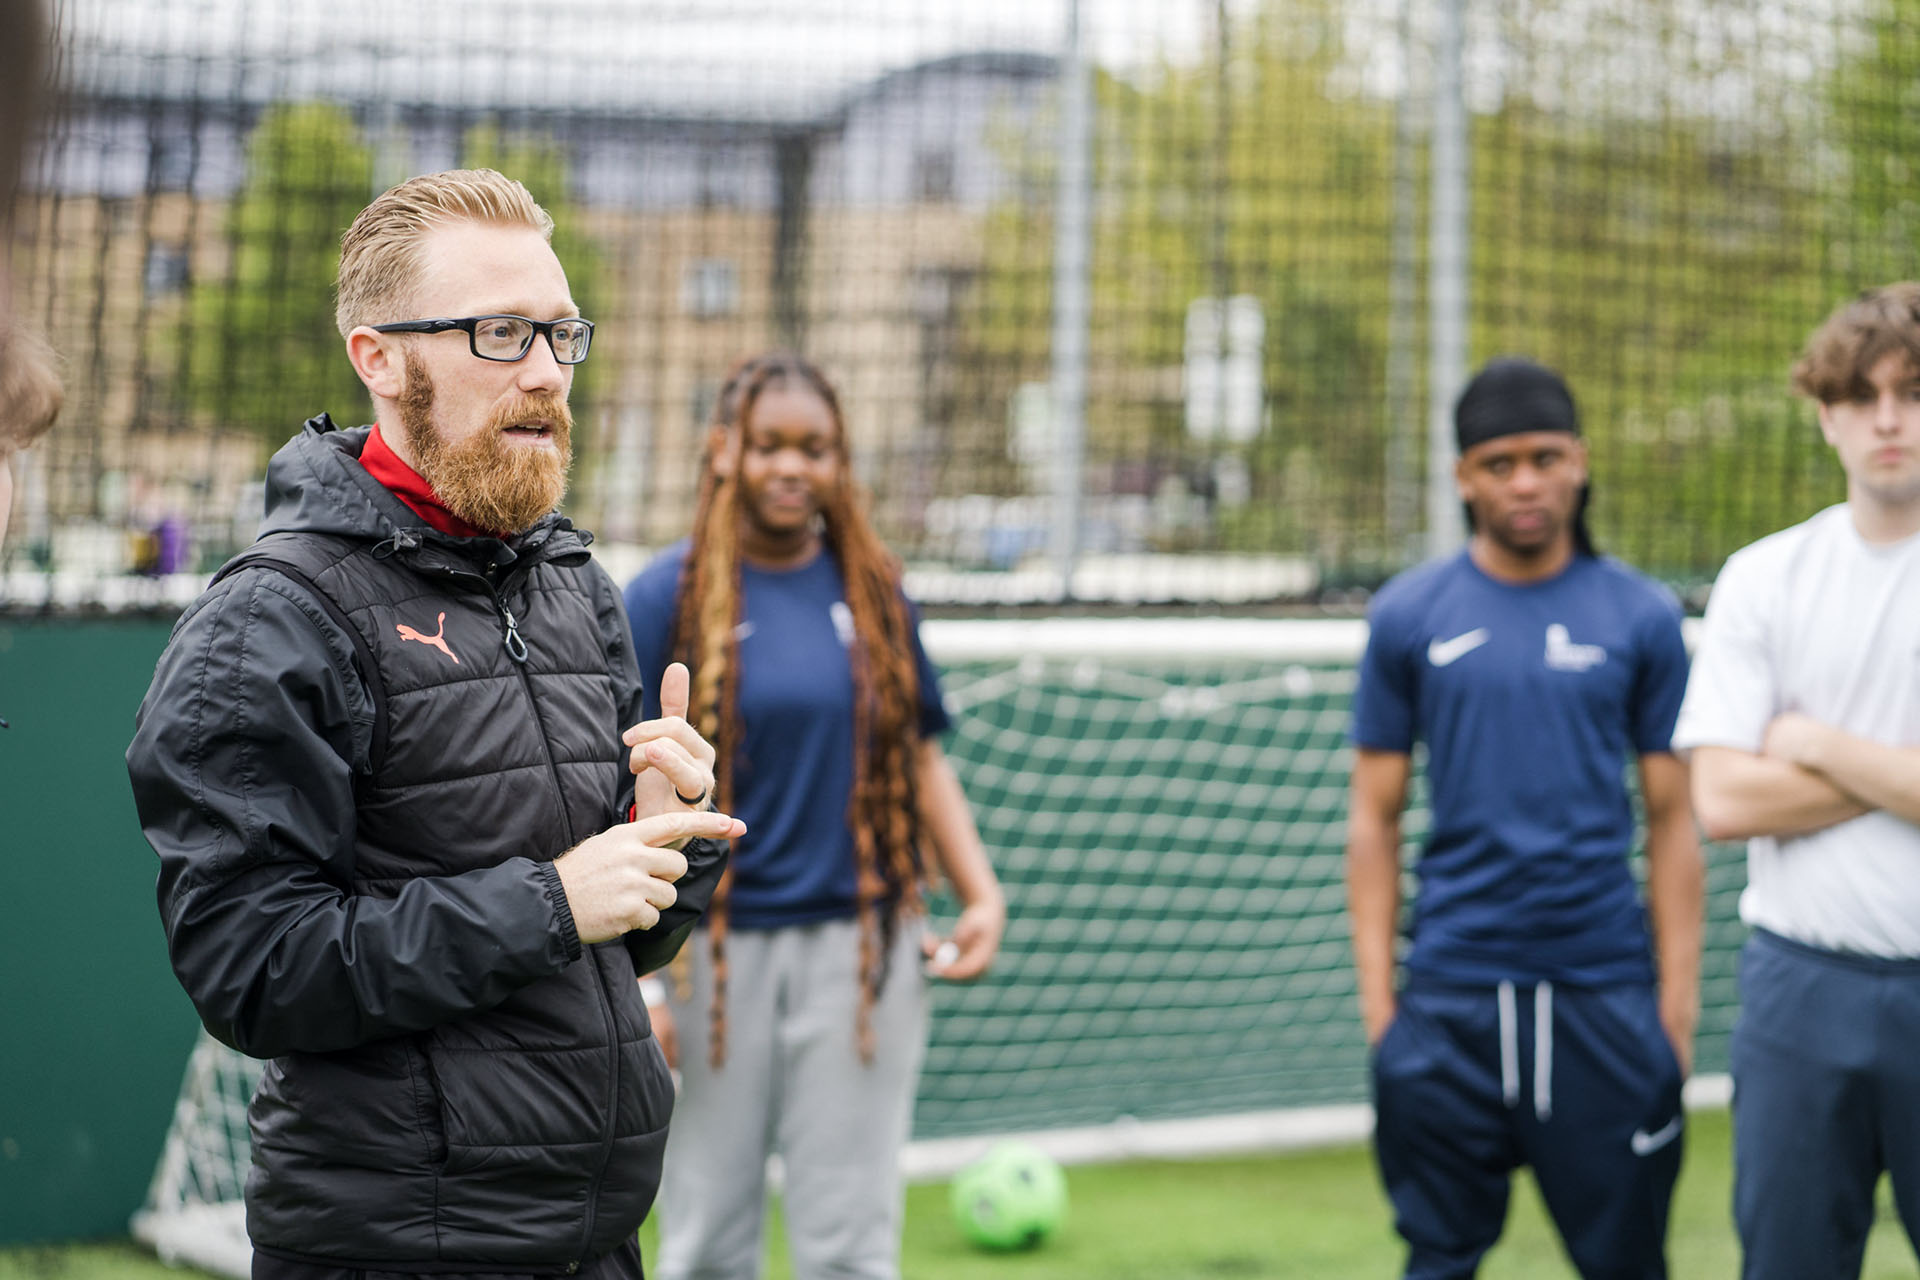 A sports teachers giving a talk to potential students out on the playing grounds